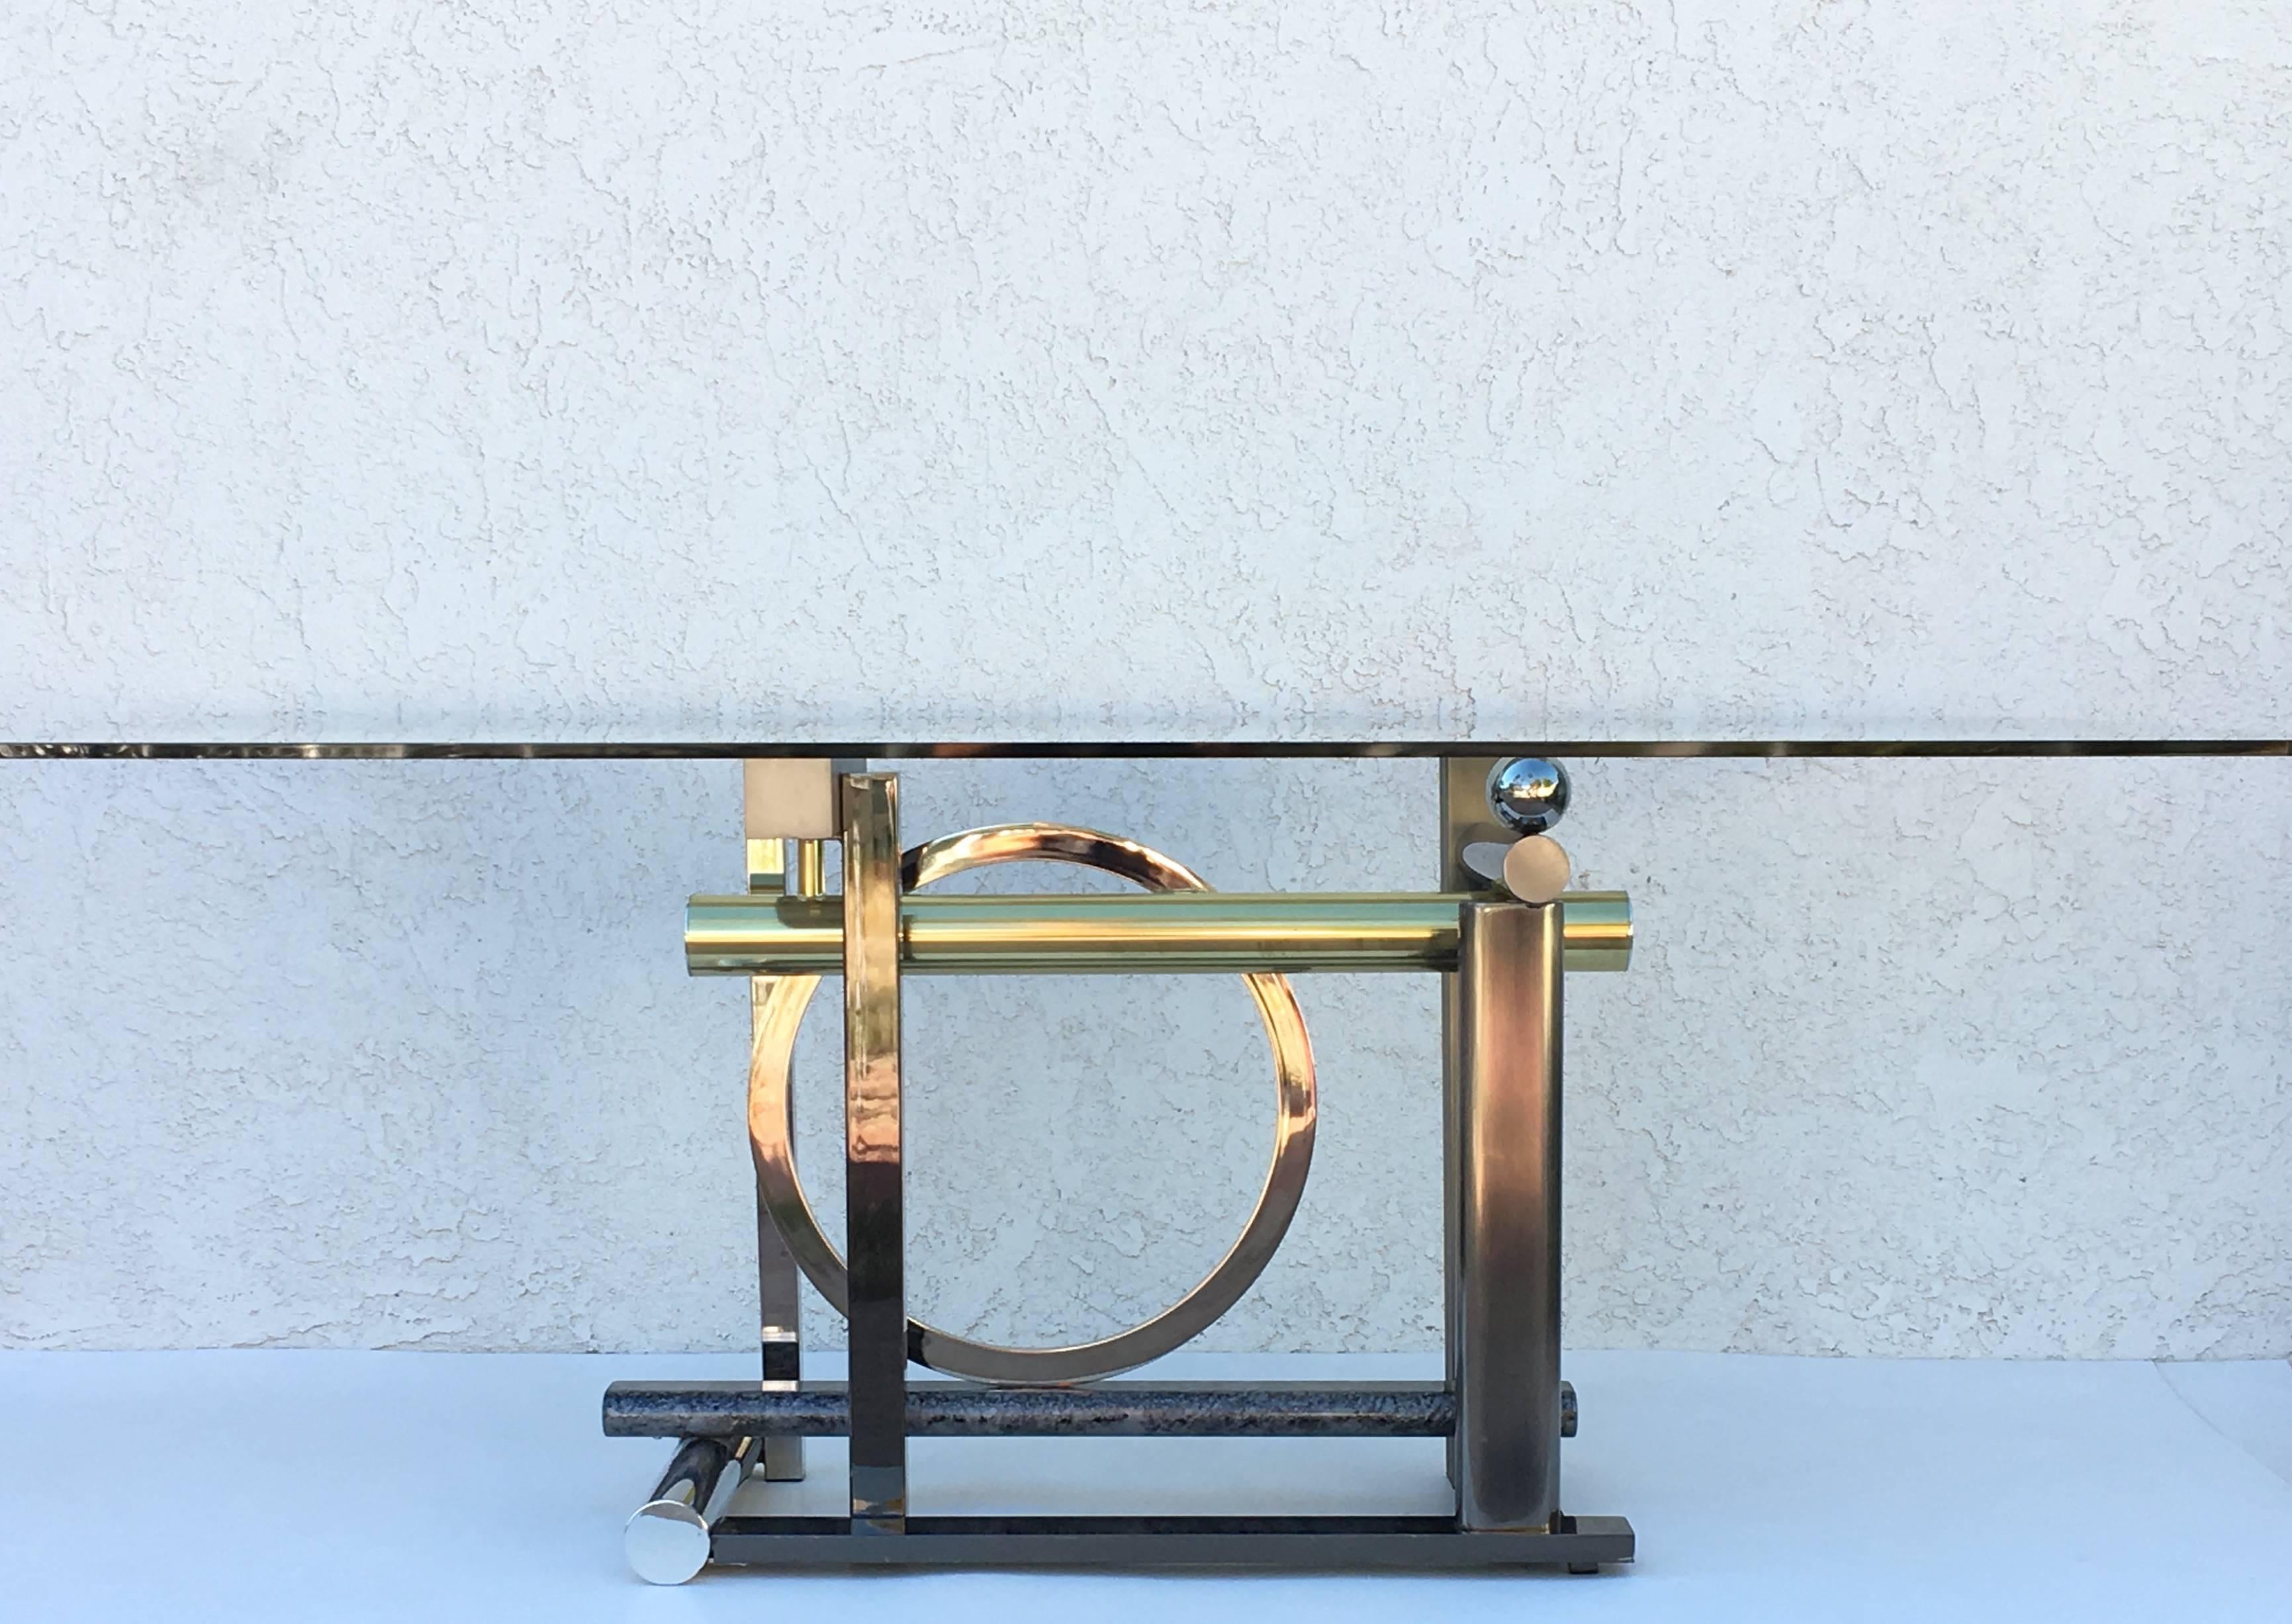 A sculptural postmodern dining table or desk design by Rick Lee for Design Institute of America in 1993

The base is made out of mix metals (brass, chrome, brushed stainless steel, gunmetal and many other finishes.
Measures: The glass top is 1/2